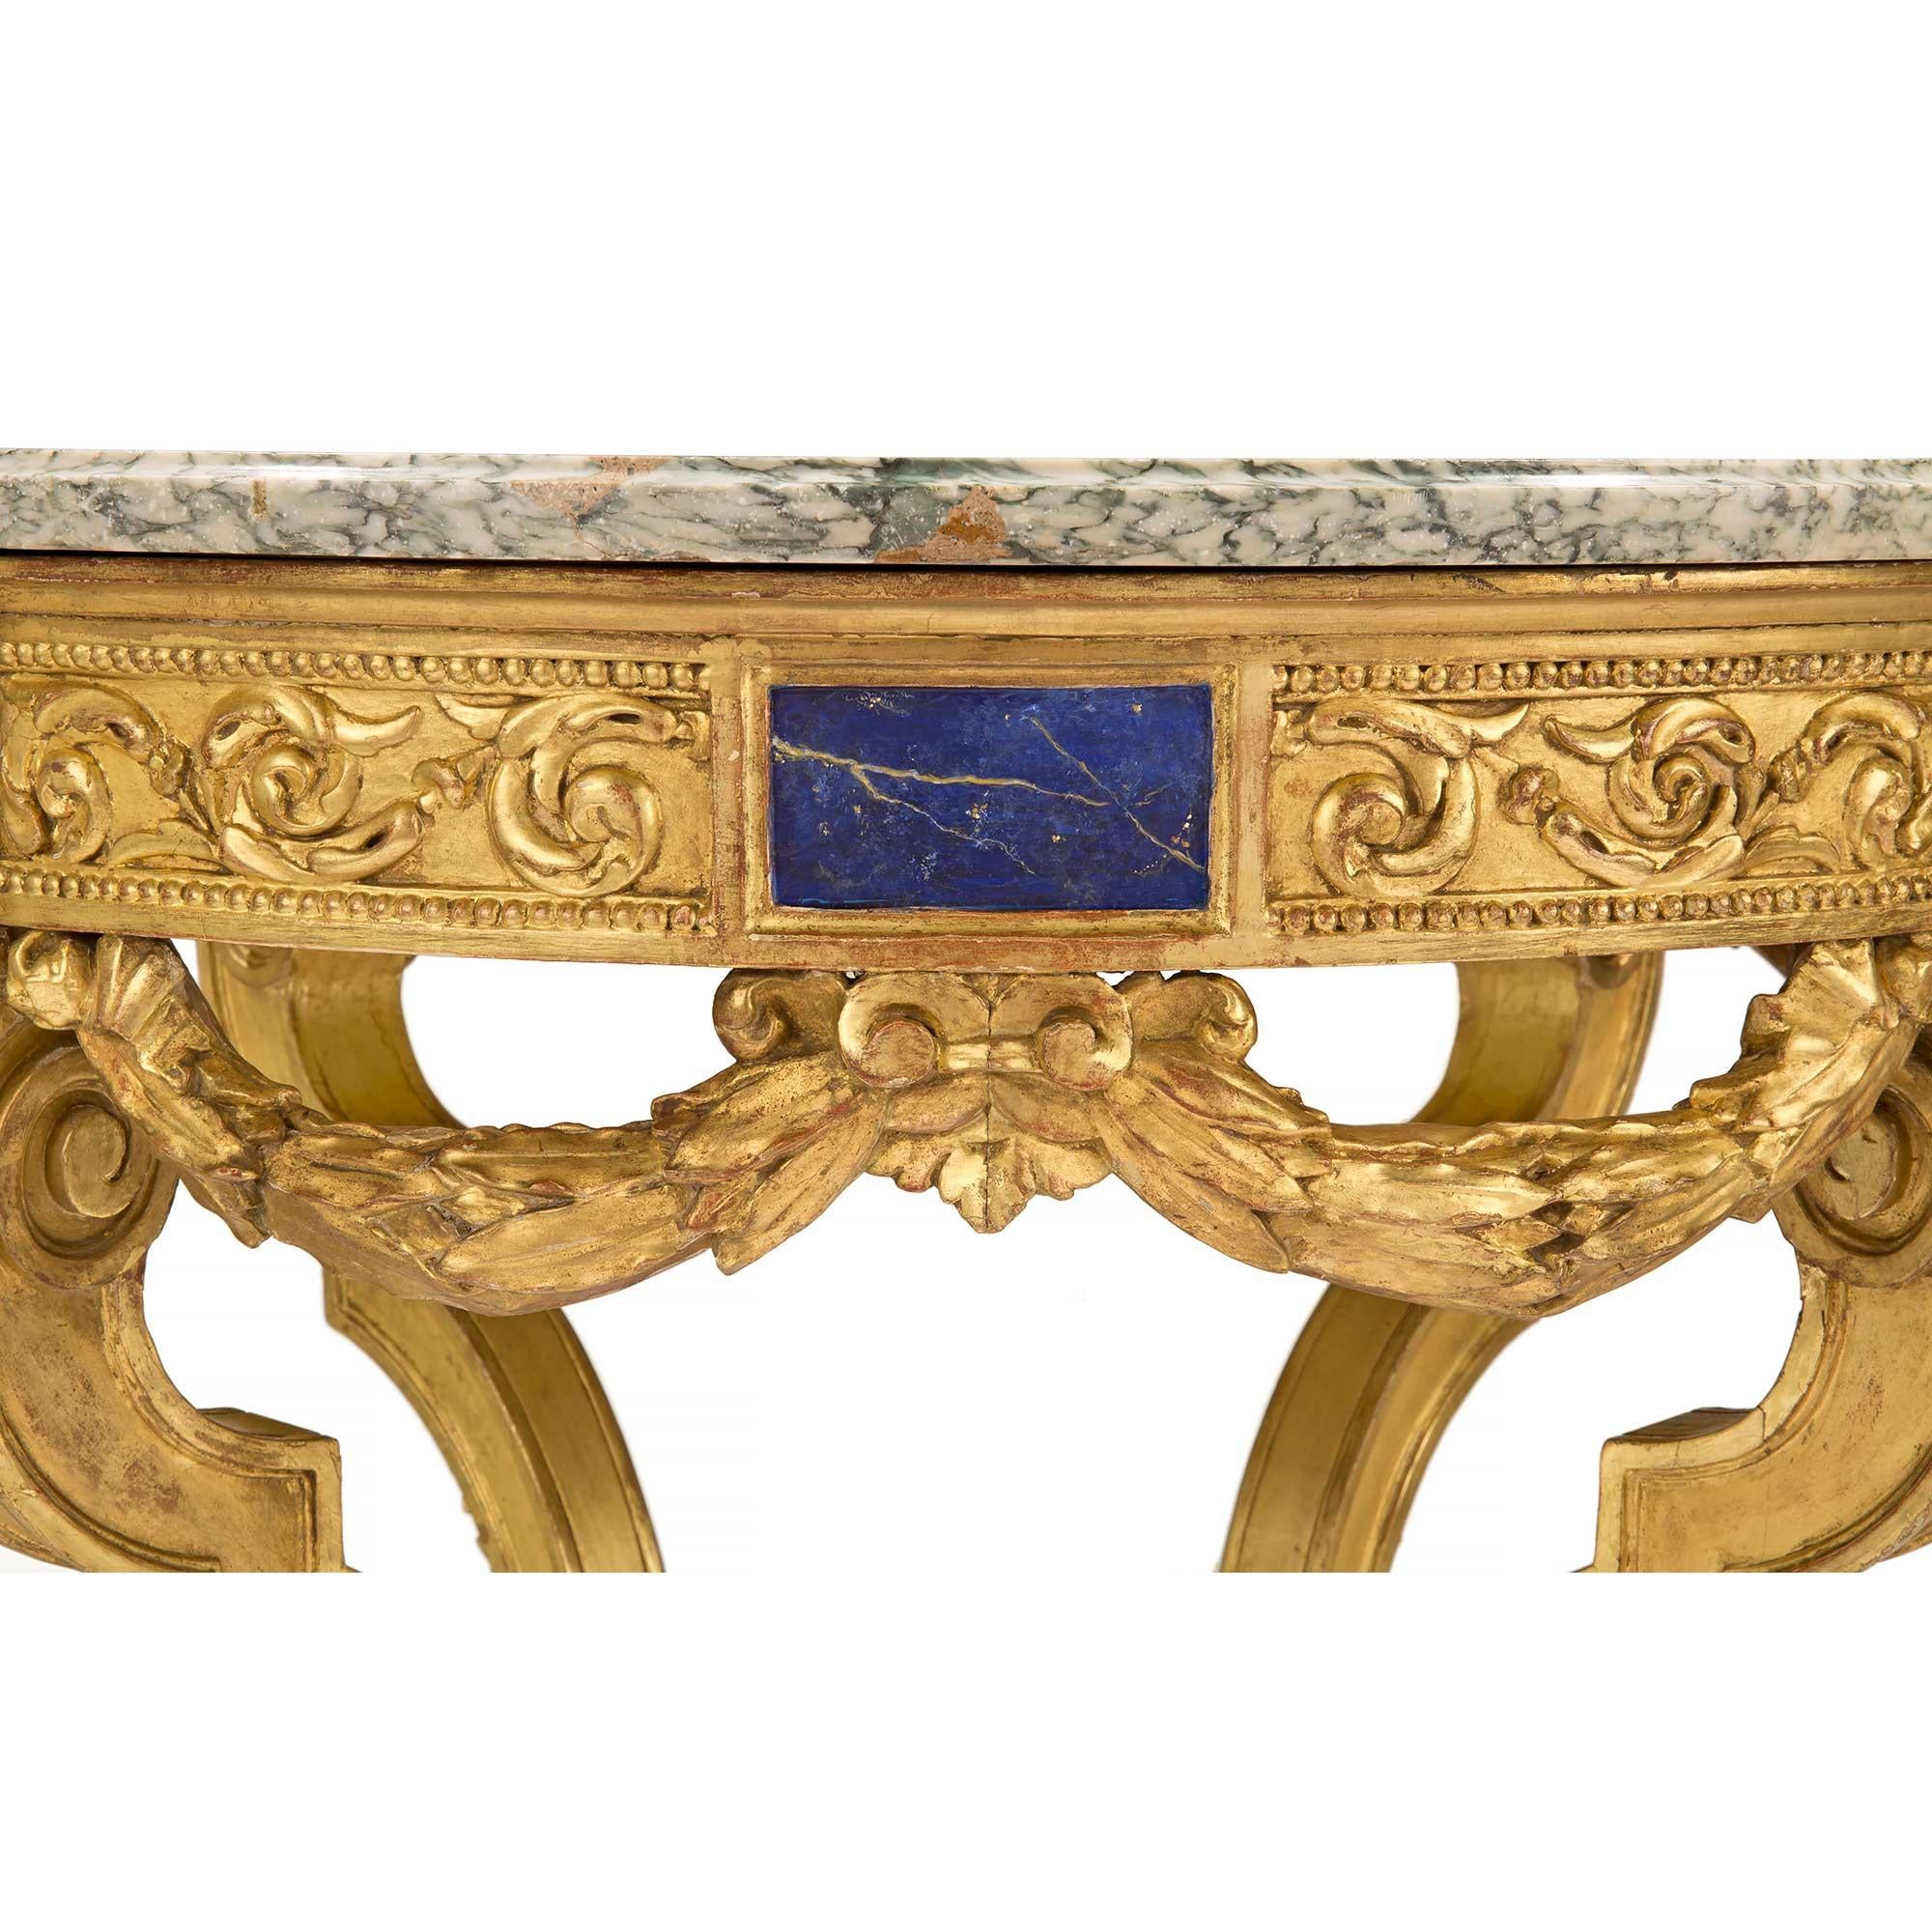 French 19th Century Neoclassical Style Giltwood and Campan Marble Center Table For Sale 1